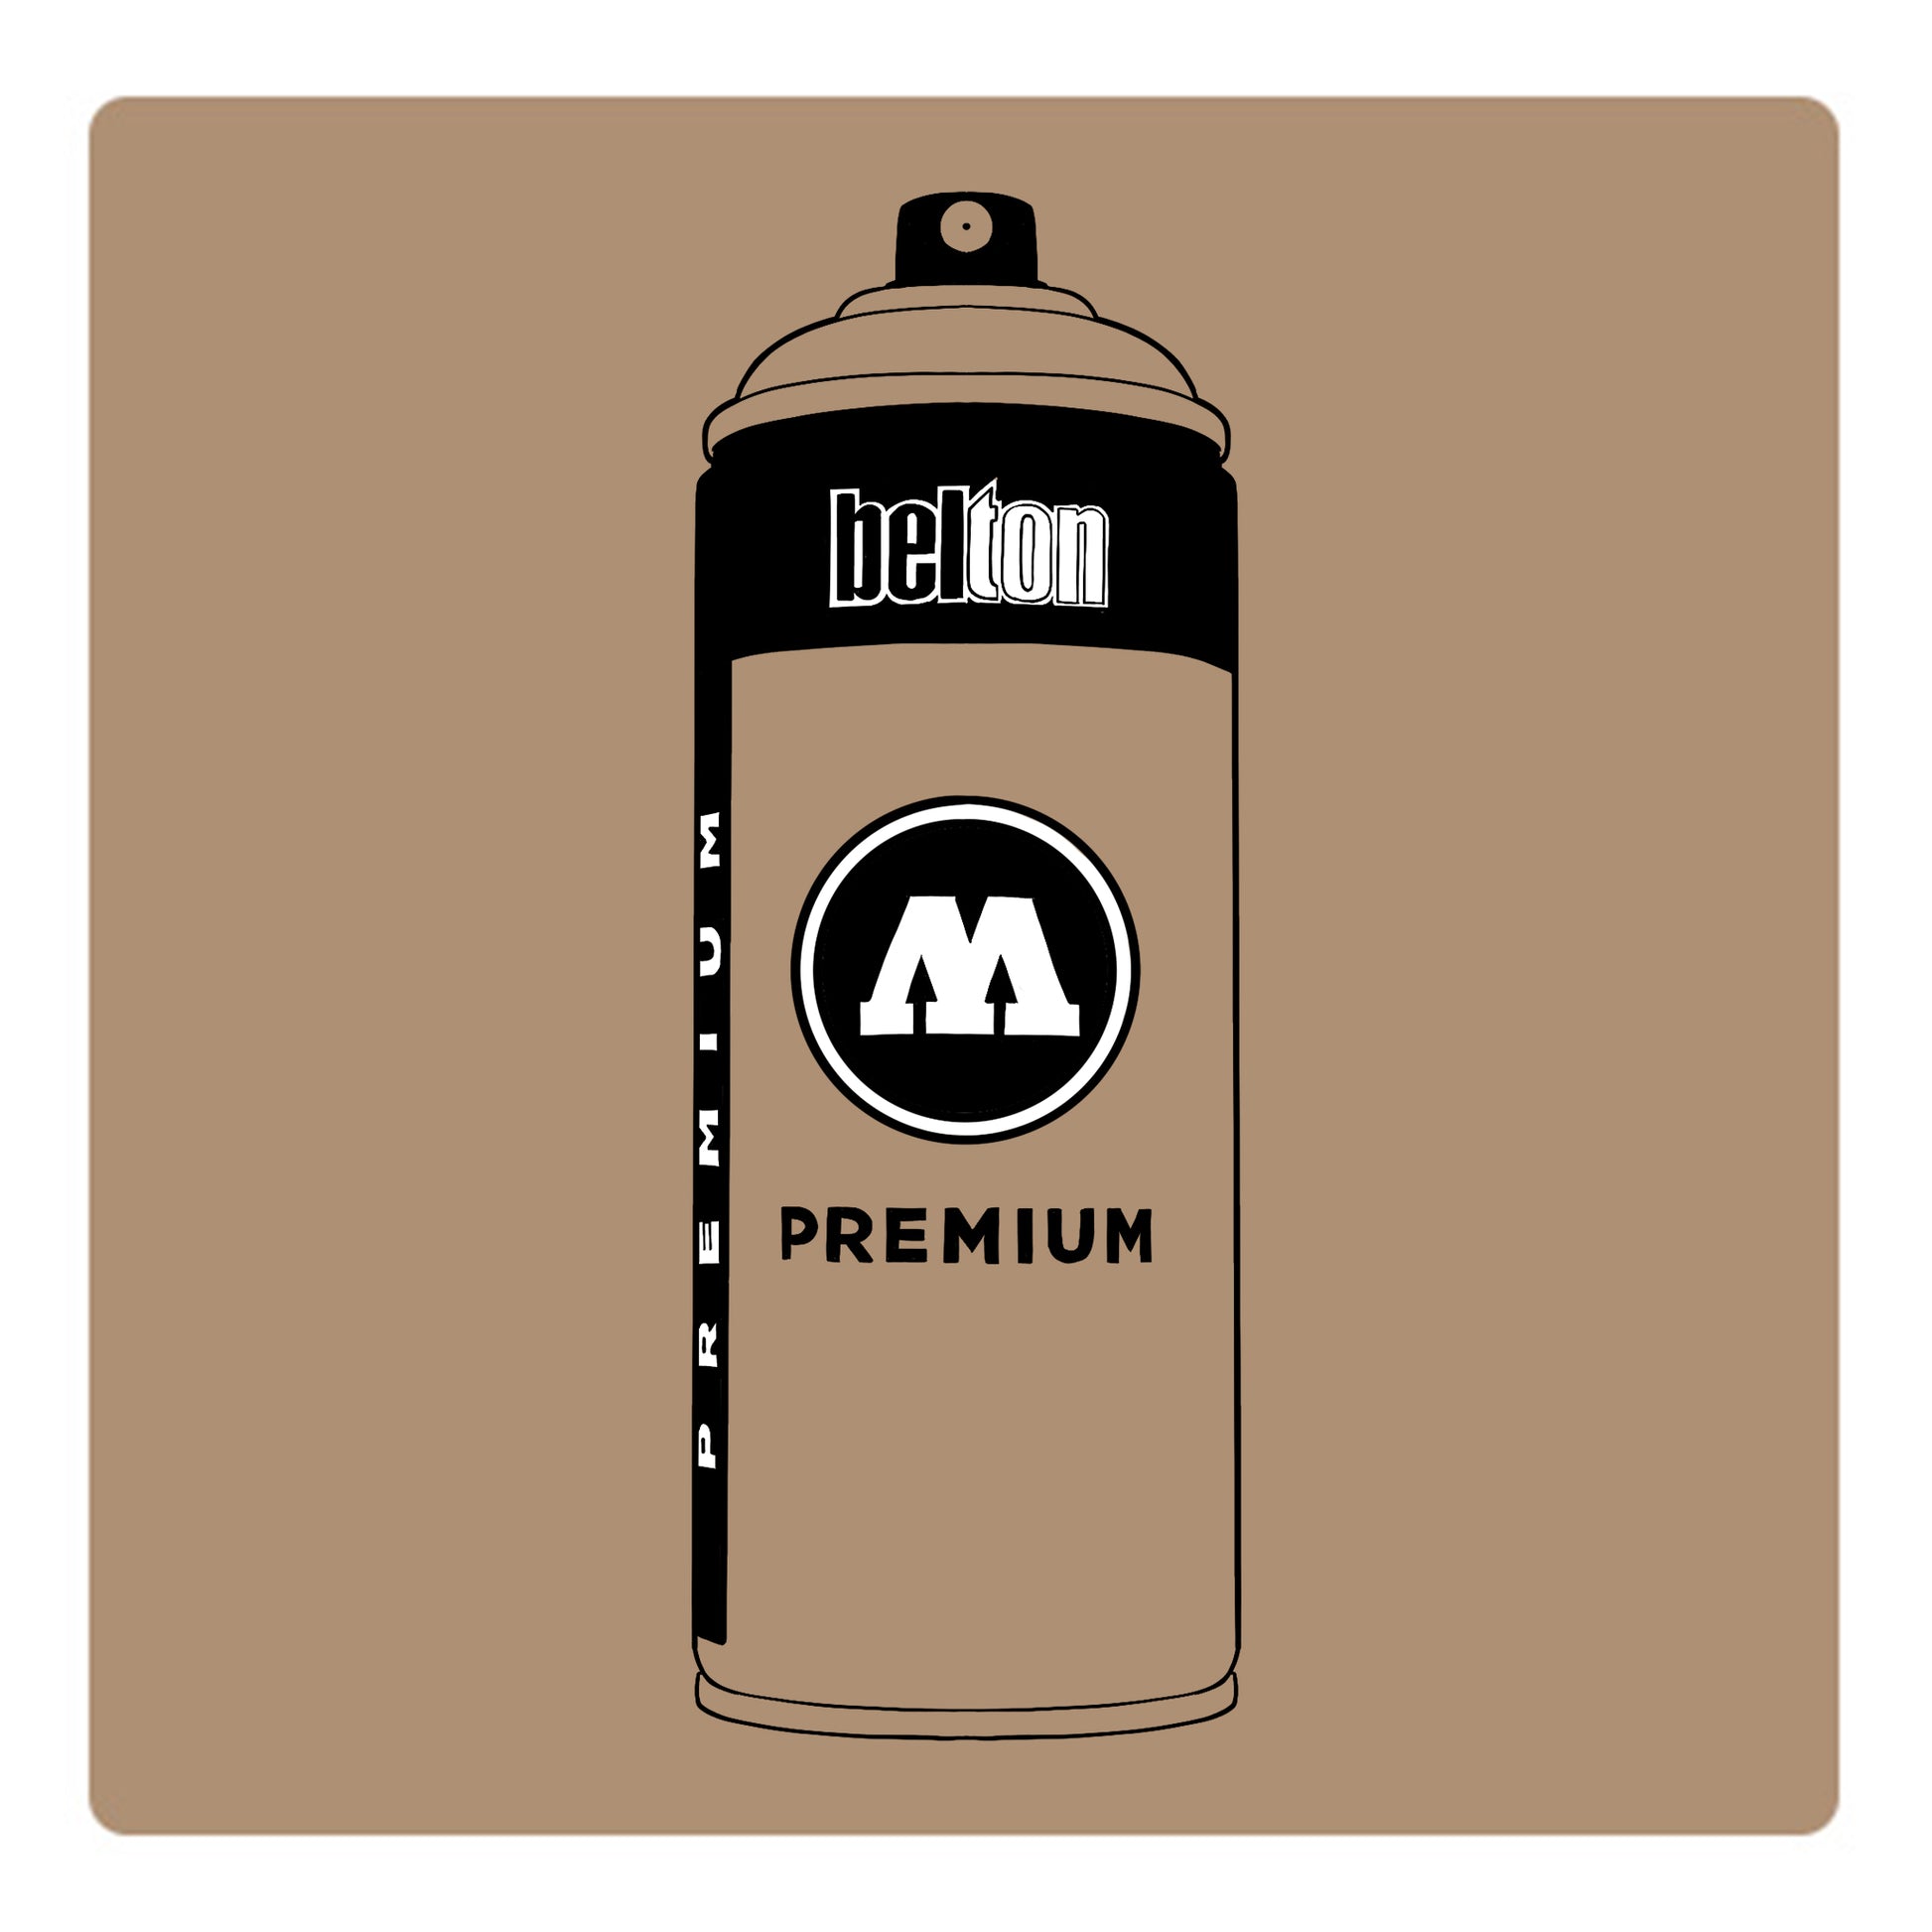 A black outline drawing of a cream brown beige spray paint can with the words "belton","premium" and the letter"M" written on the face in black and white font. The background is a color swatch of the same cream brown beige with a white border